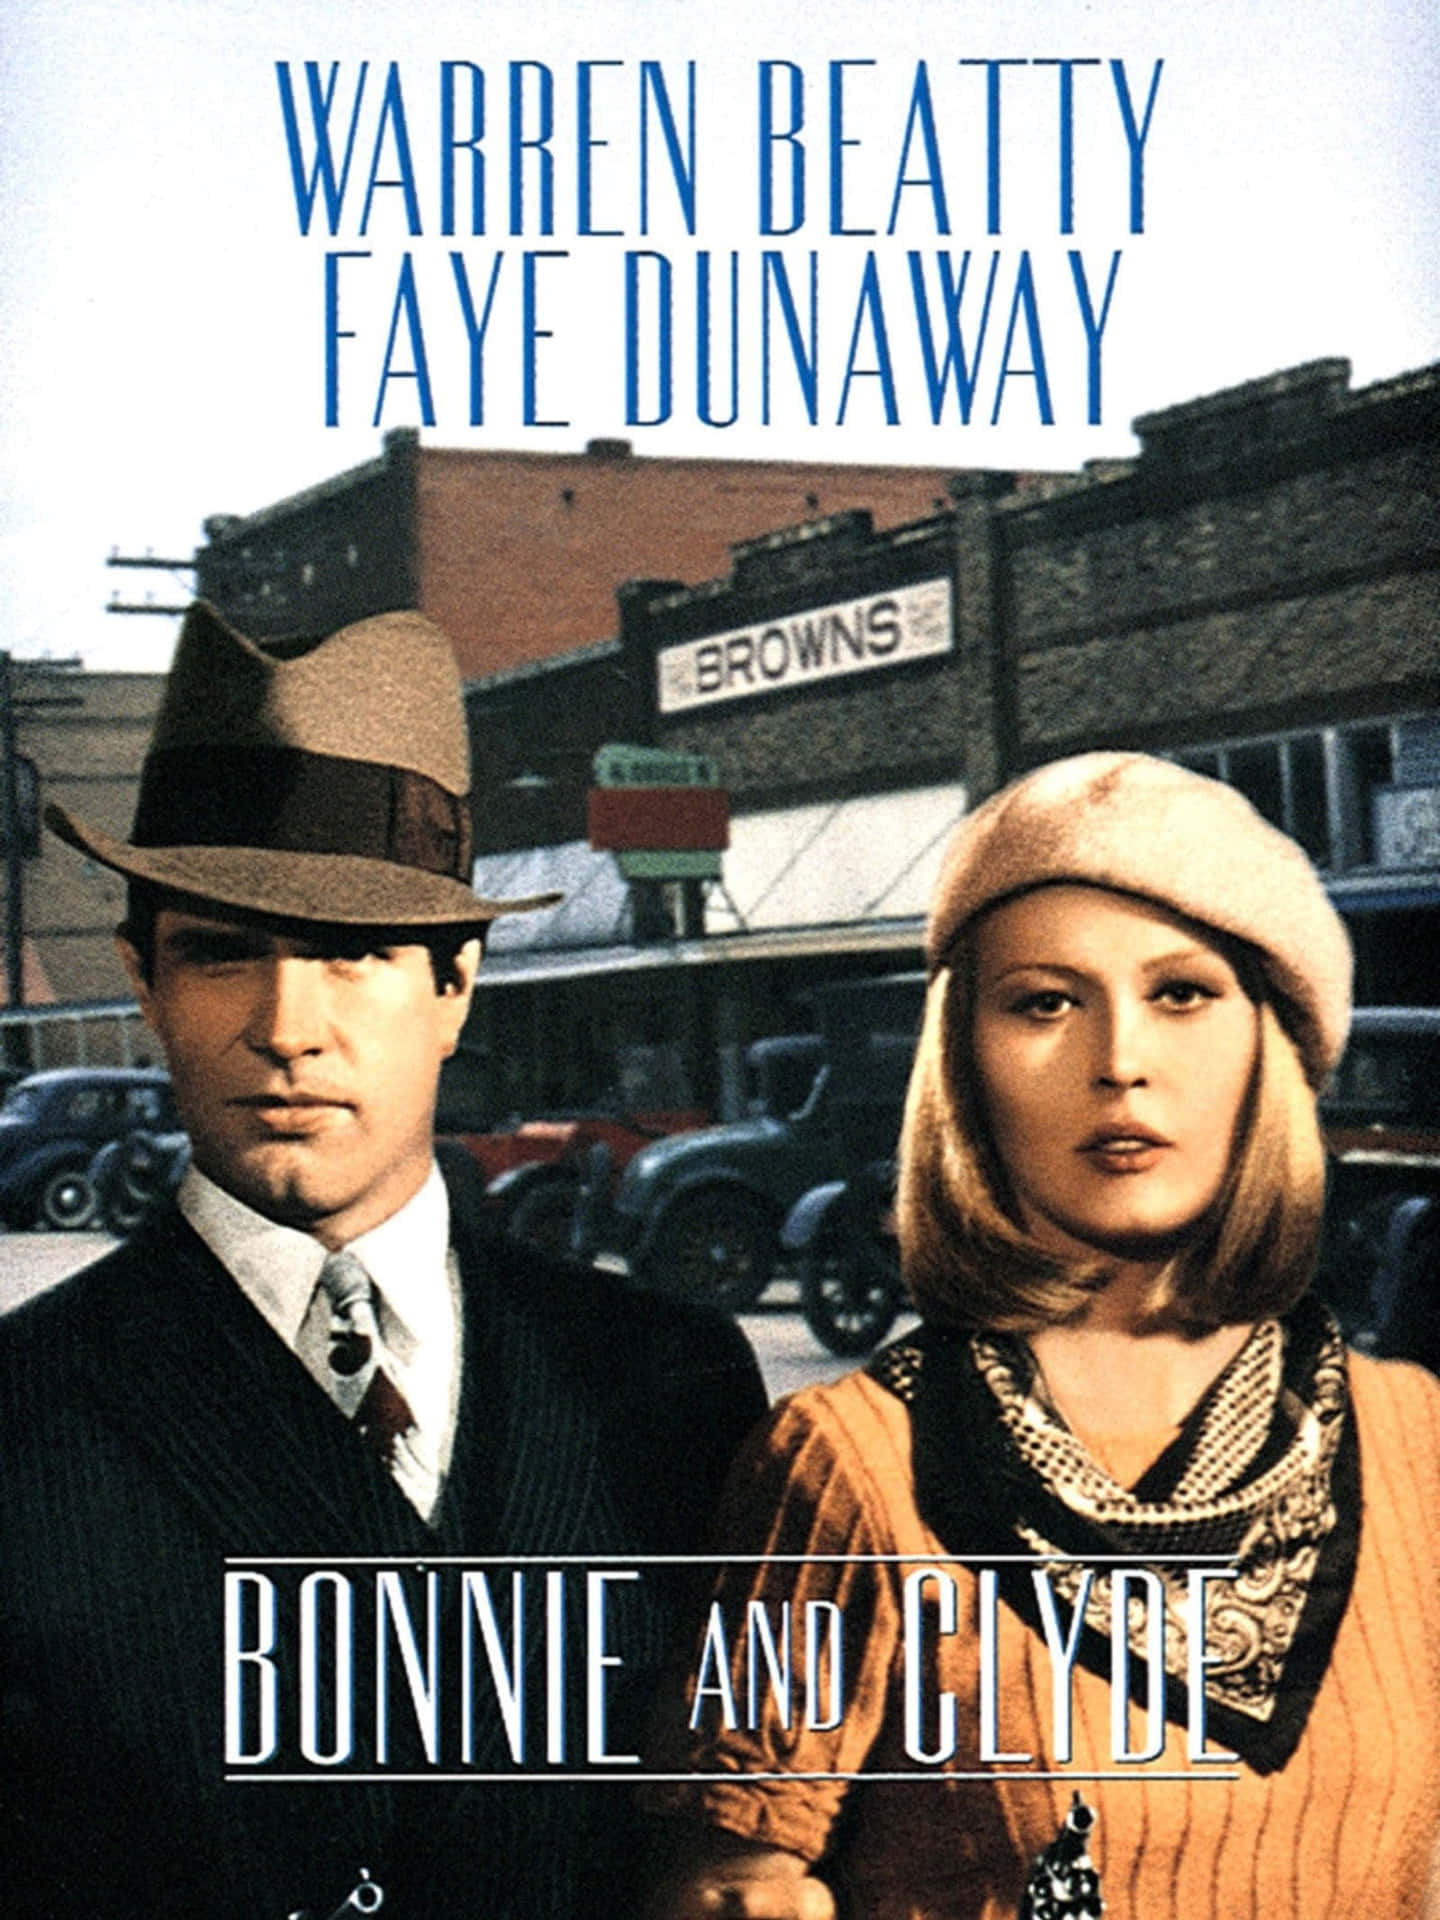 "Living life on the road, Bonnie and Clyde were destined for a doomed path."